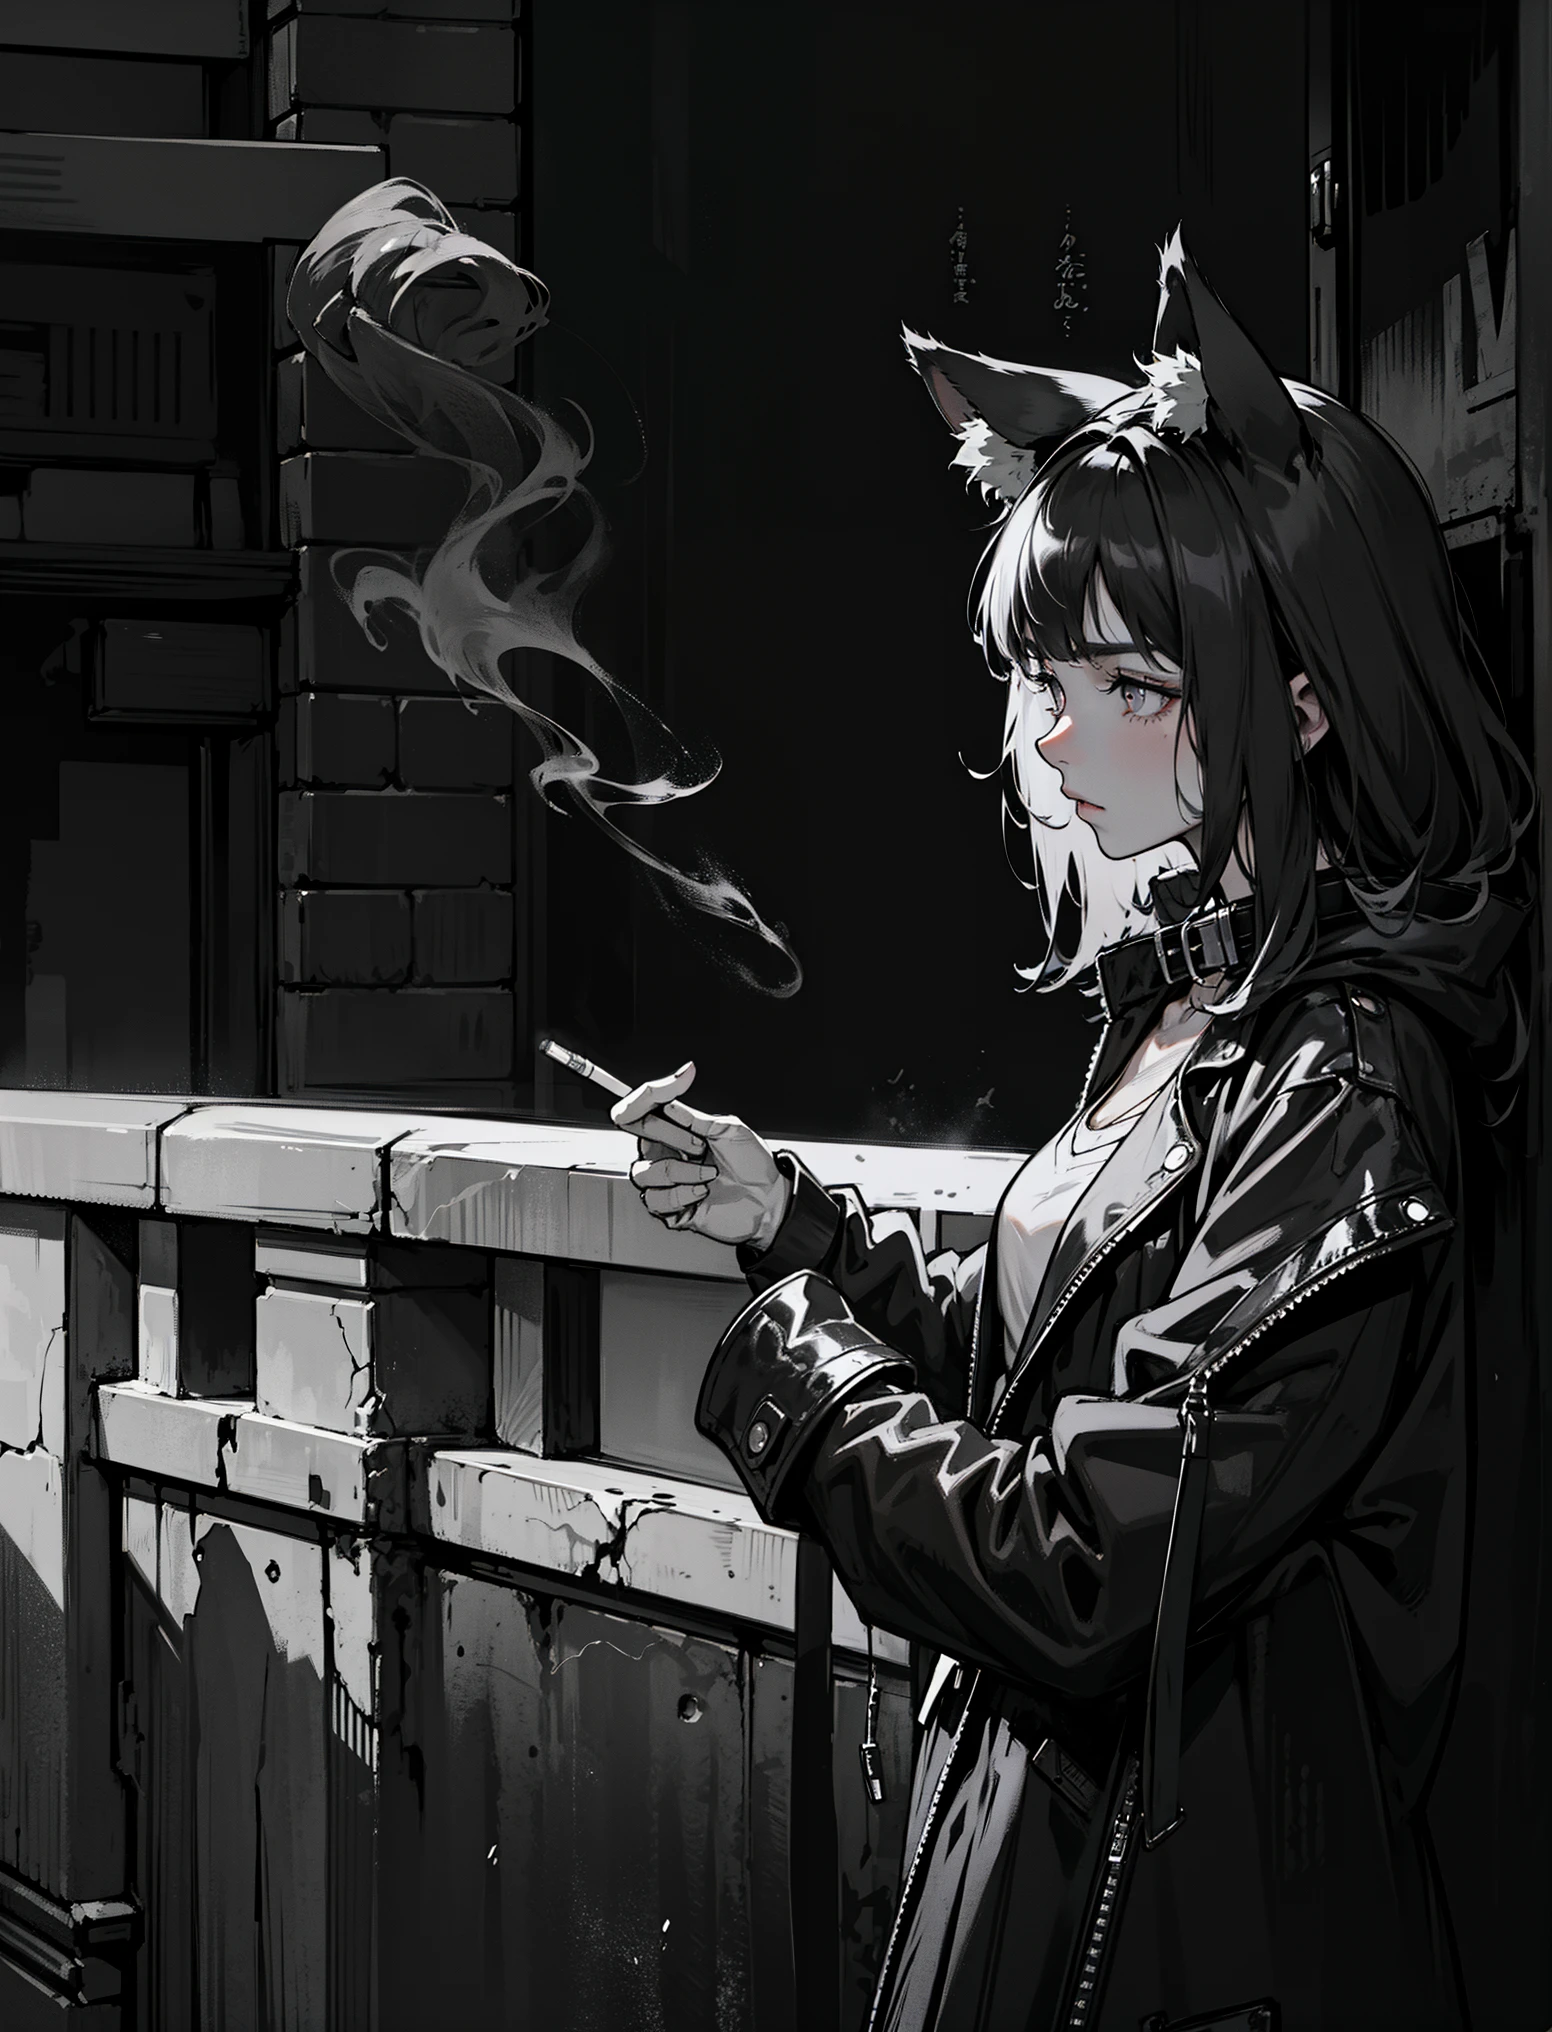 The Wolf Girl, black  hair, wolf ears with white fur inside, high collar coat, lights a cigarette, black and white, Noir, Pathos, standing against the wall, leaning on the wall, Street, NOhumans, a 1girl, cigarette,  from on the side, Grayscale, Keeps, monochrome, railing, Smoke, smoking, solo, Anime style, 2d drawing, Thoughtful, serious, Pathos, Noir